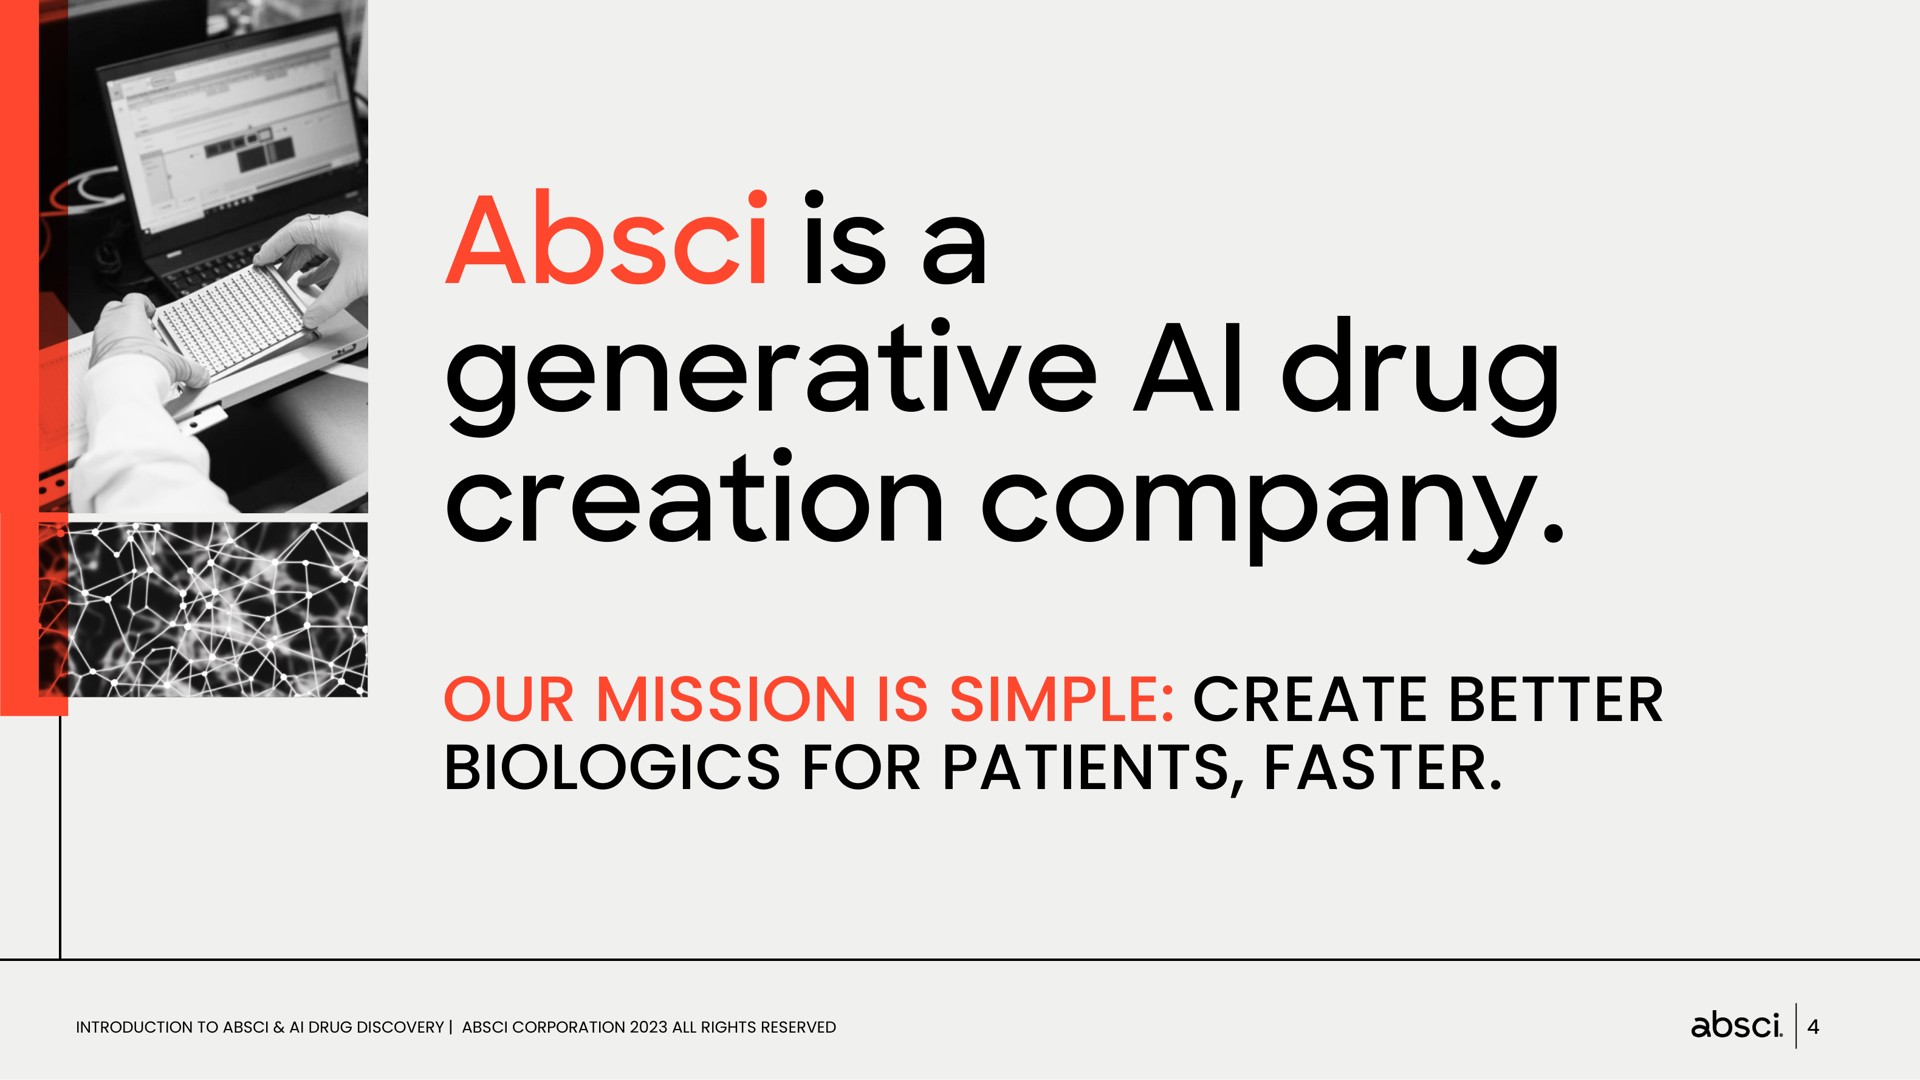 is a generative drug creation company our mission is simple create better for patients faster | Absci